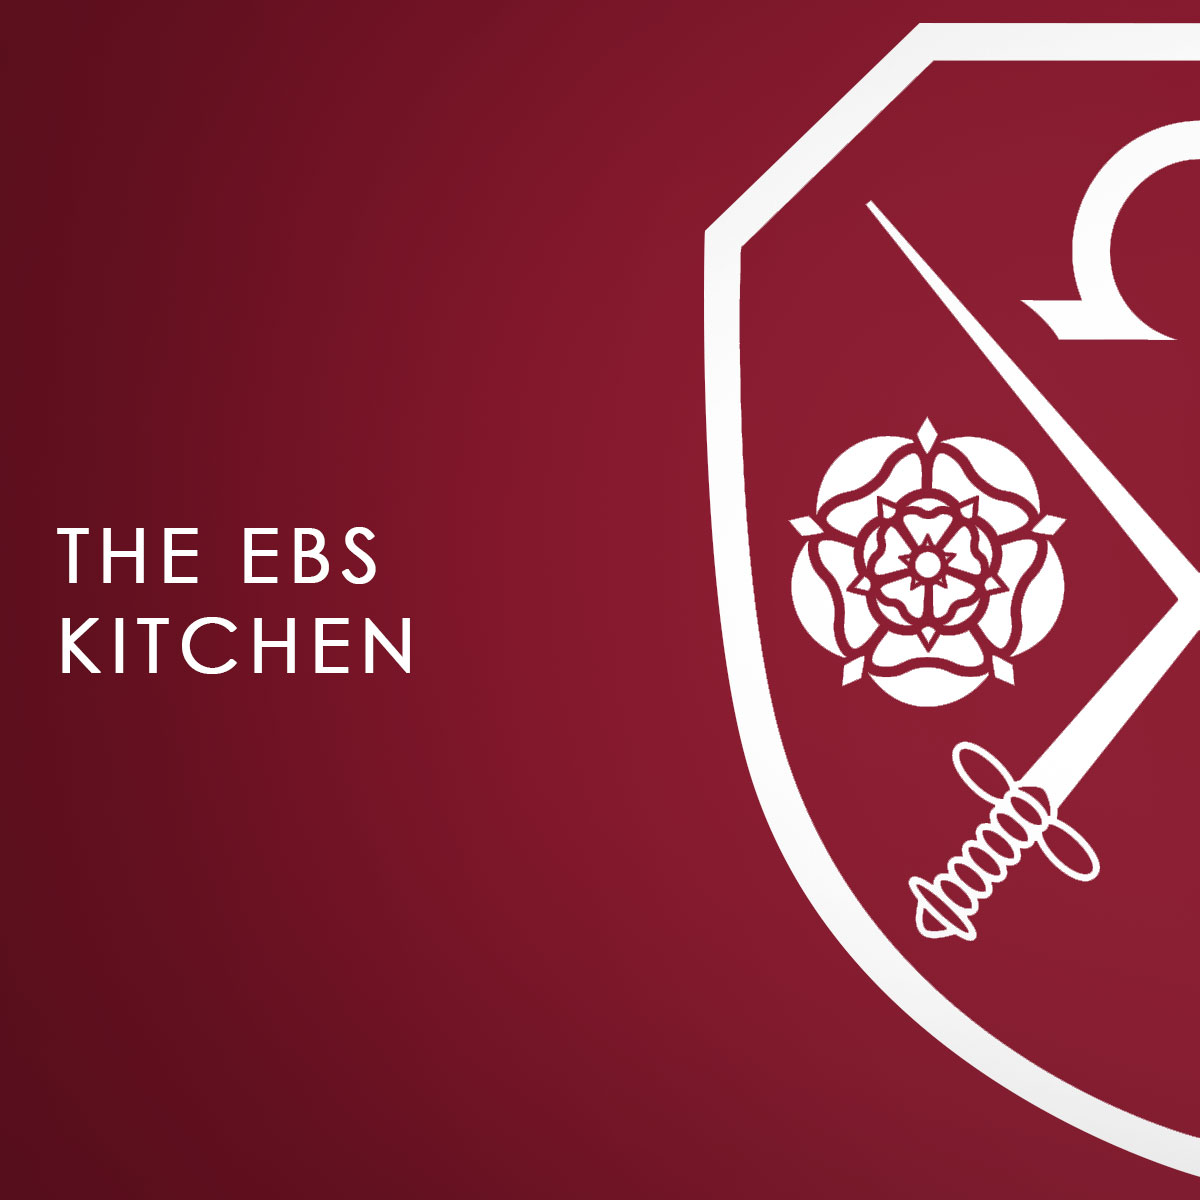 A maroon background with the East Barnet School logo which says The EBS Kitchen